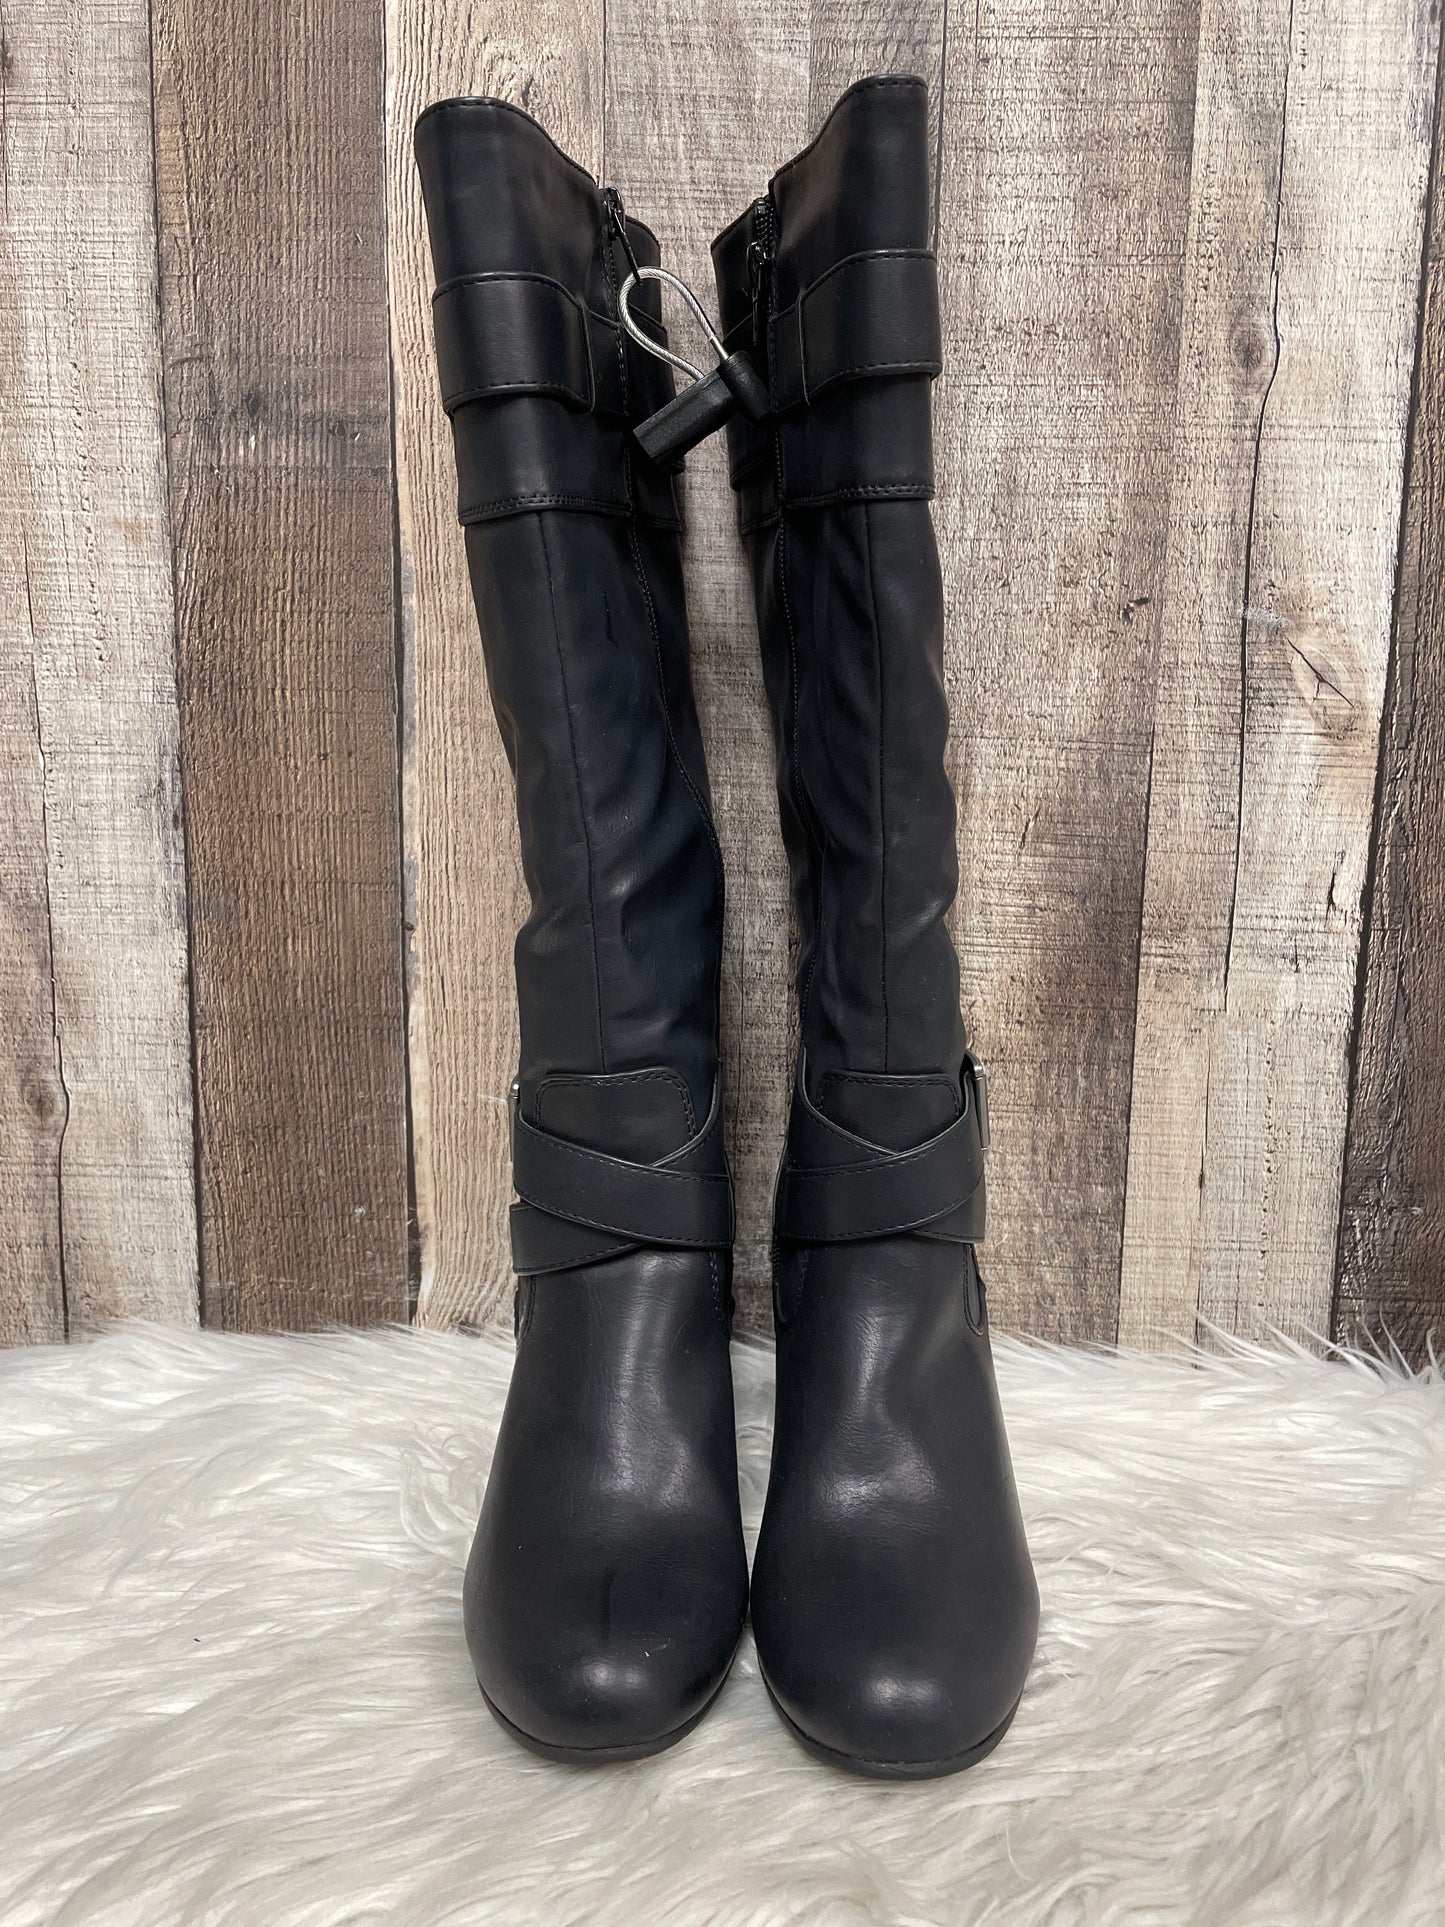 Boots Knee Heels By Nicole  Size: 7.5